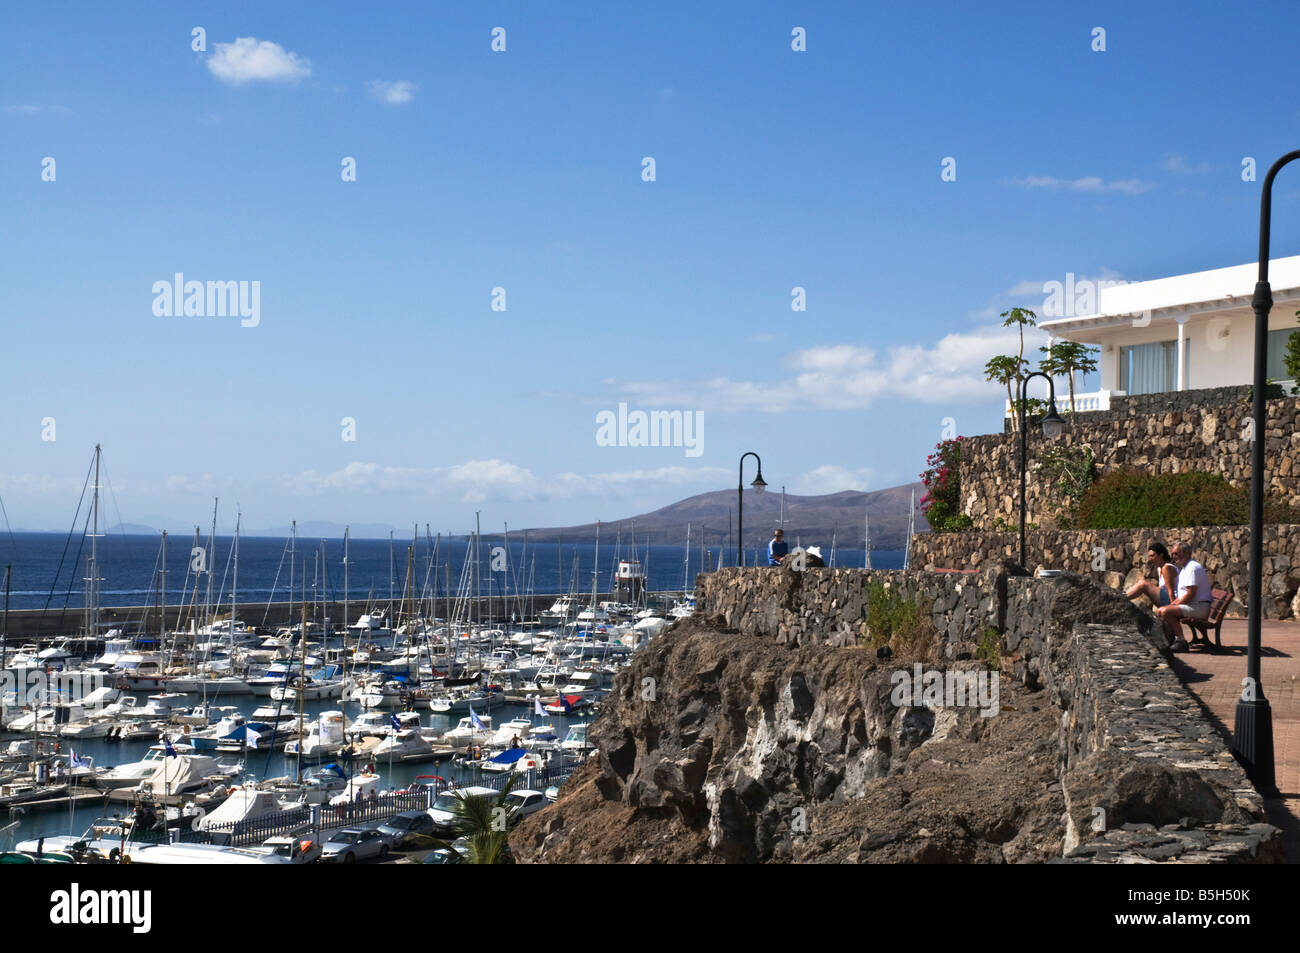 dh  PUERTO CALERO LANZAROTE Tourist Holidaymaker people couple sitting on bench overlooking marina Stock Photo